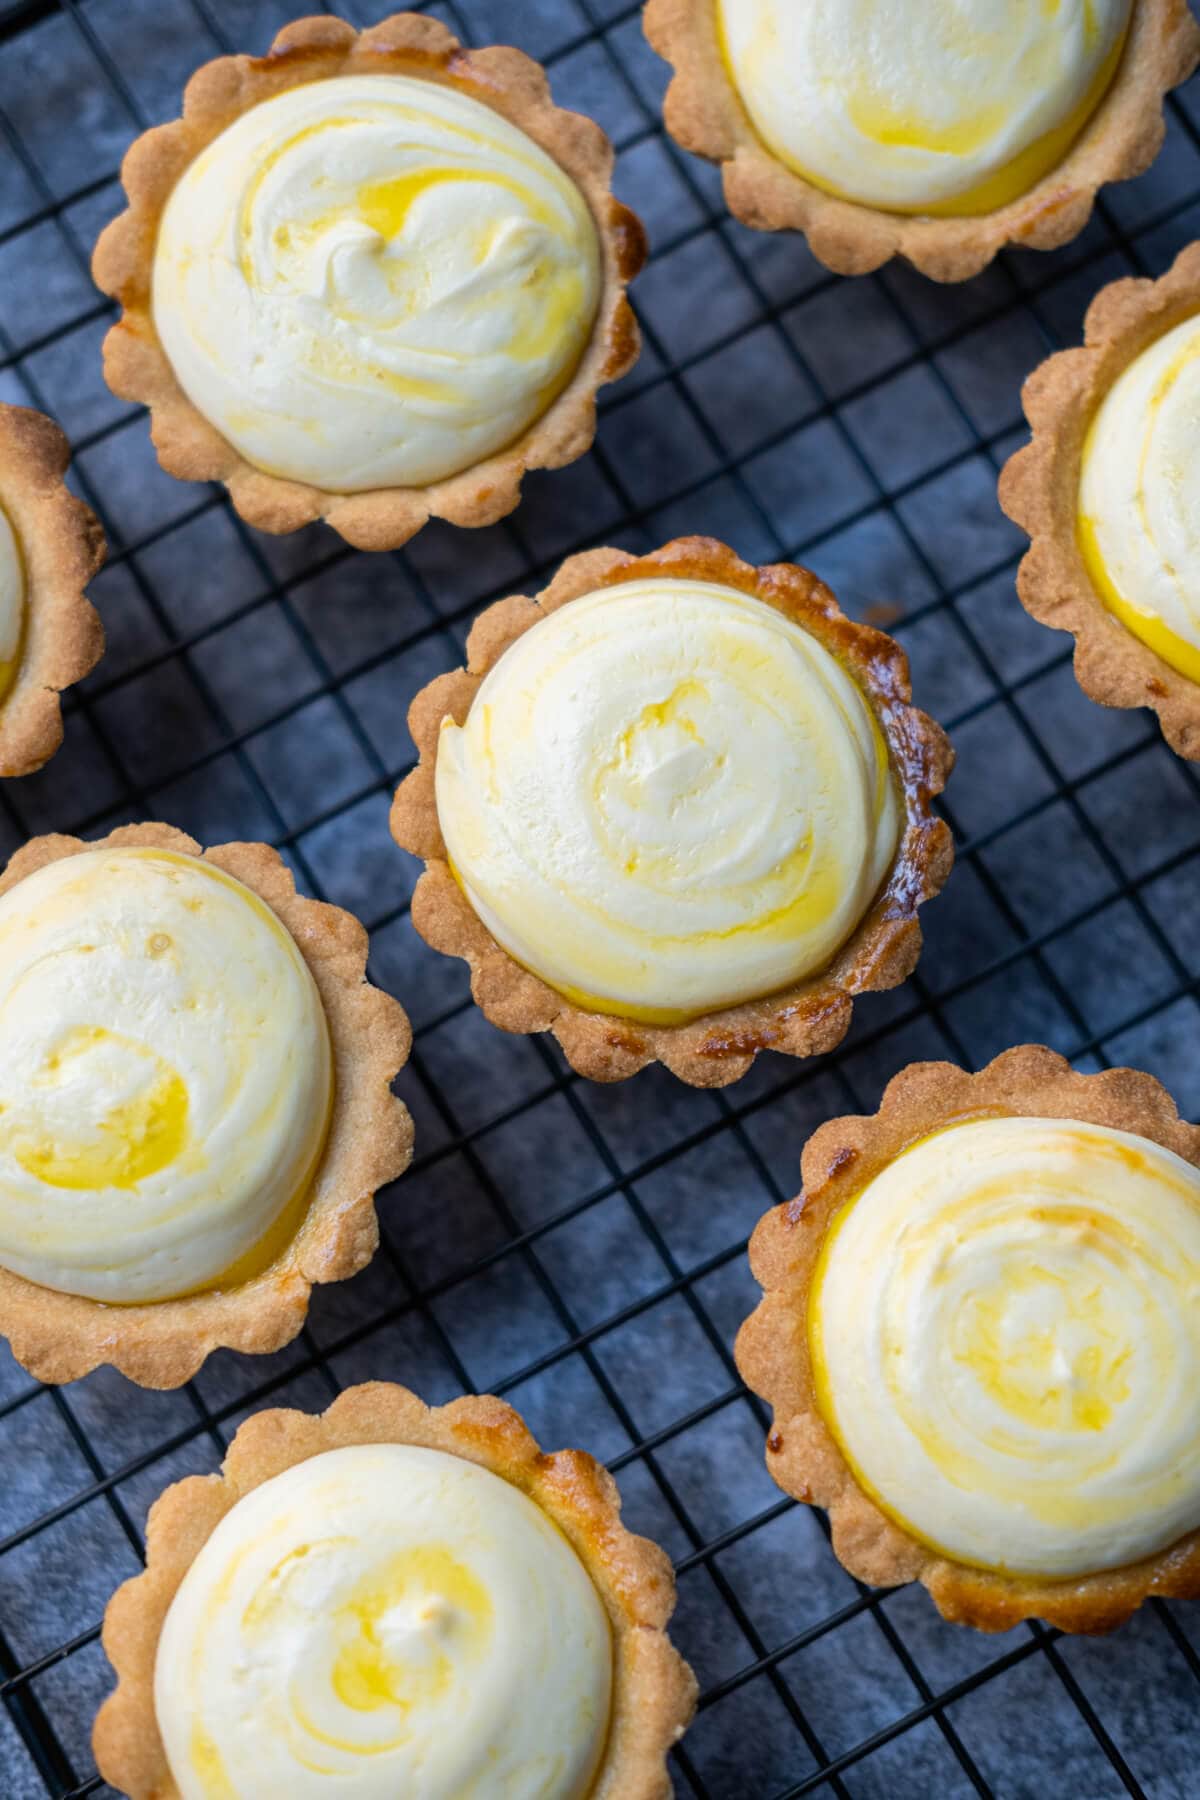 Baked cheese tarts, featuring a golden-brown crust and a creamy cheese filling. 